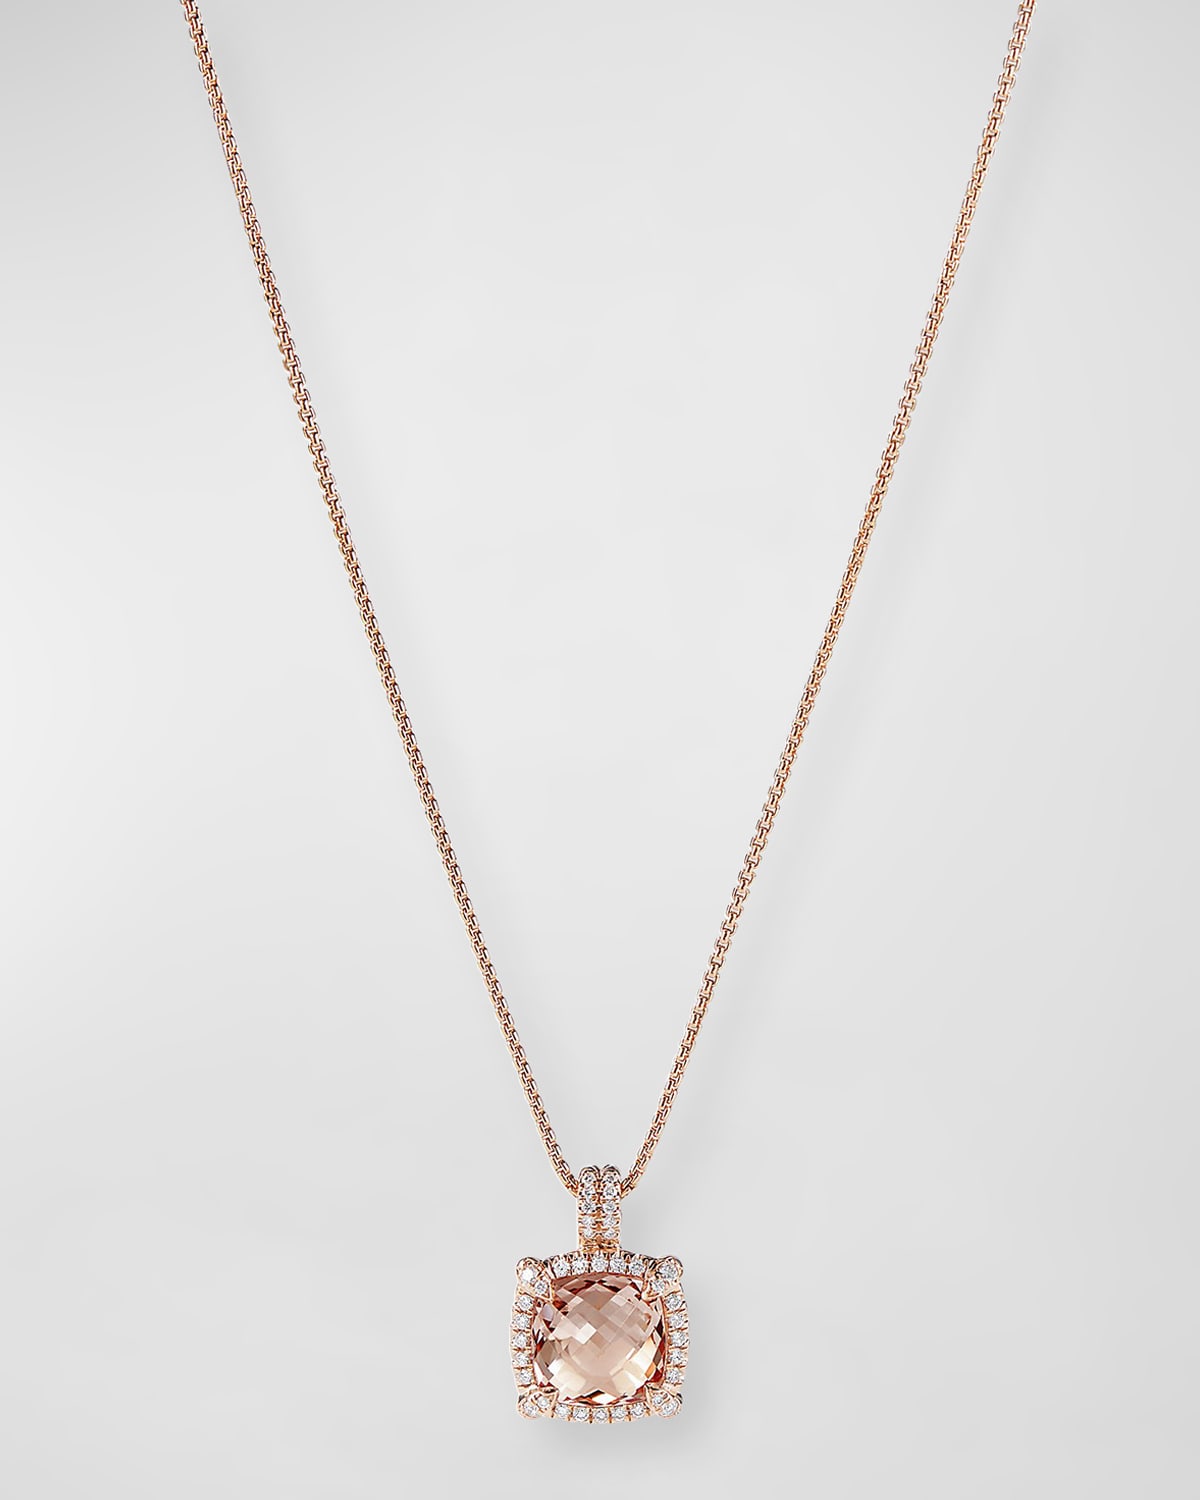 Shop David Yurman Chatelaine Pendant Necklace With Morganite And Diamonds In 18k Rose Gold, 11mm, 16-18"l In 25 Pink